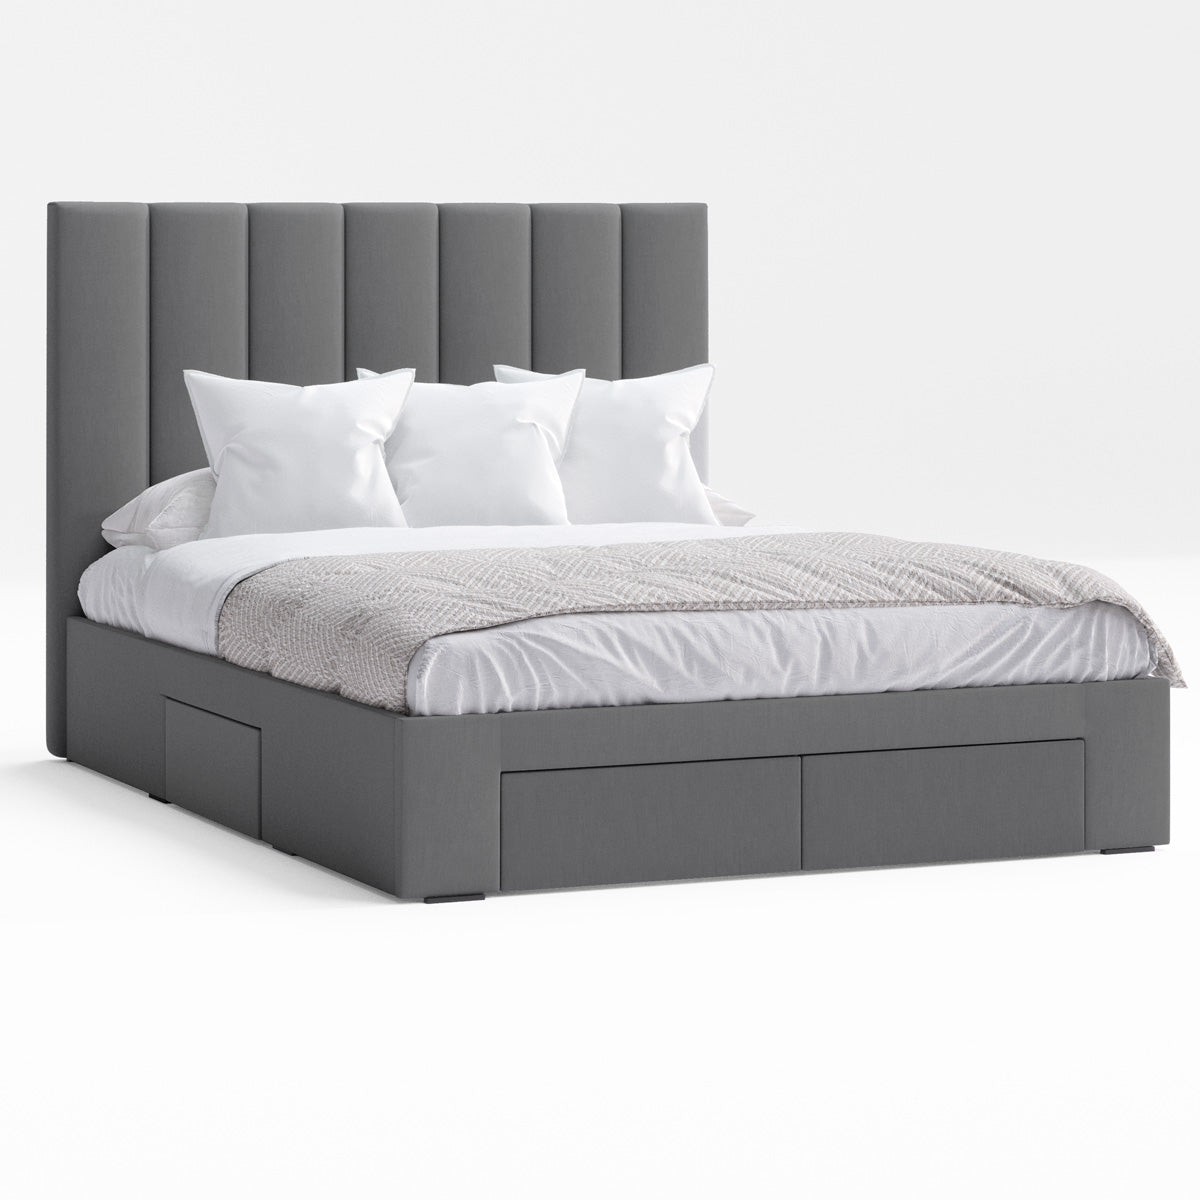 Celine Bed Frame with Four Extra Large Drawers (Charcoal Fabric)